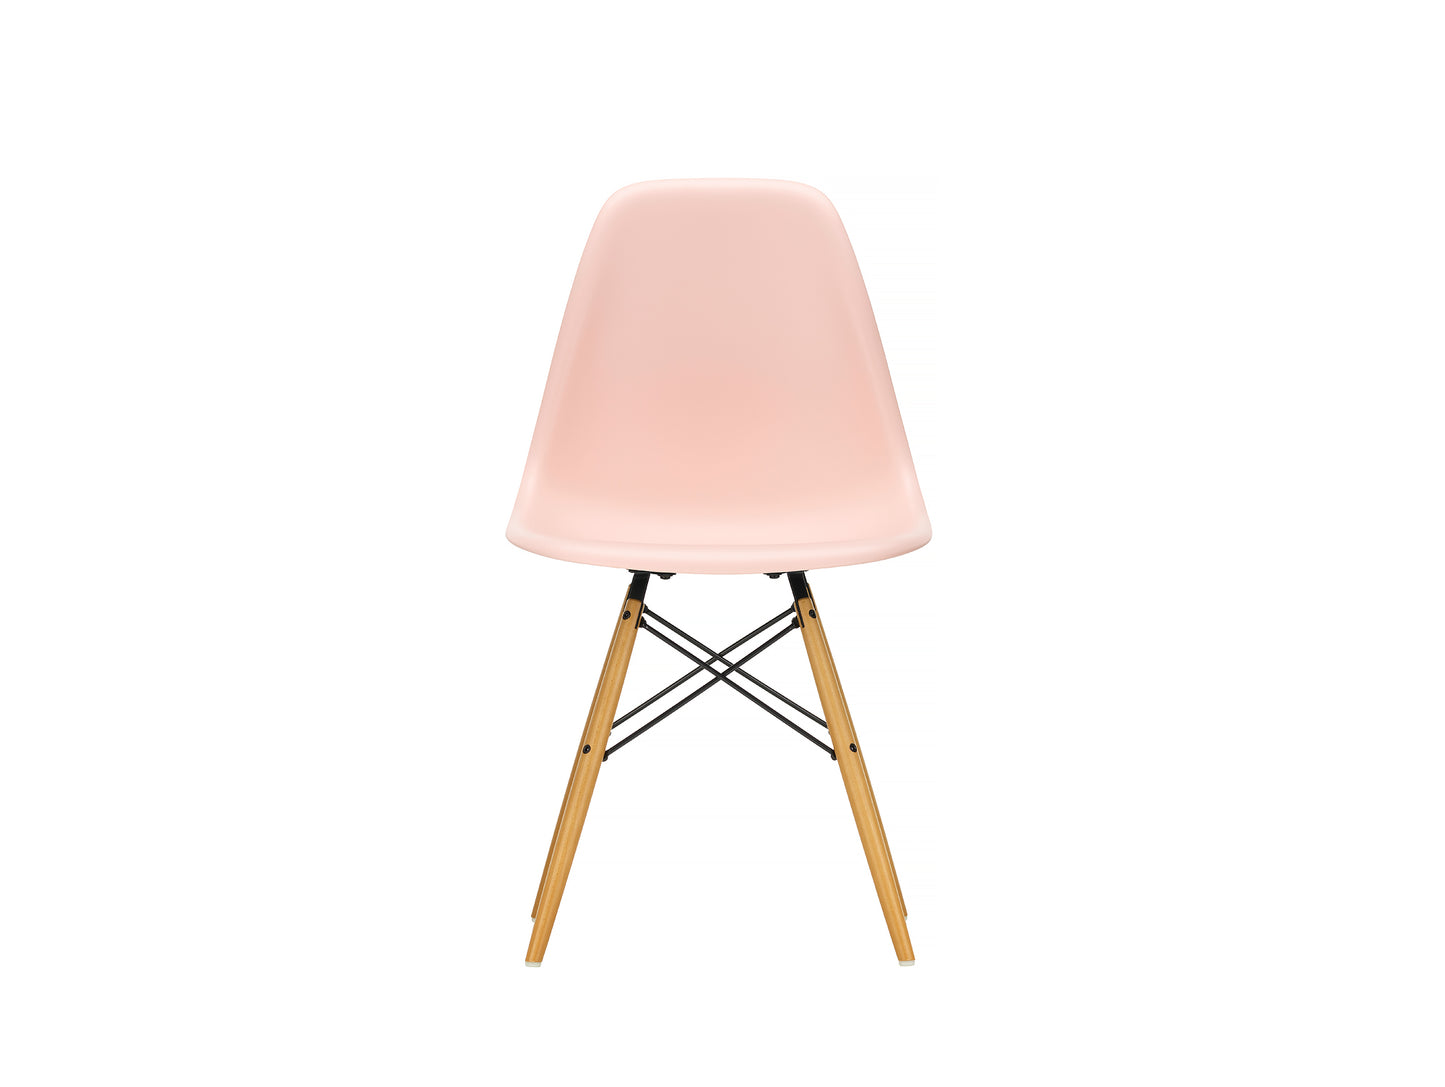 Vitra Eames DSW Plastic Side Chair - Pale Rose 41